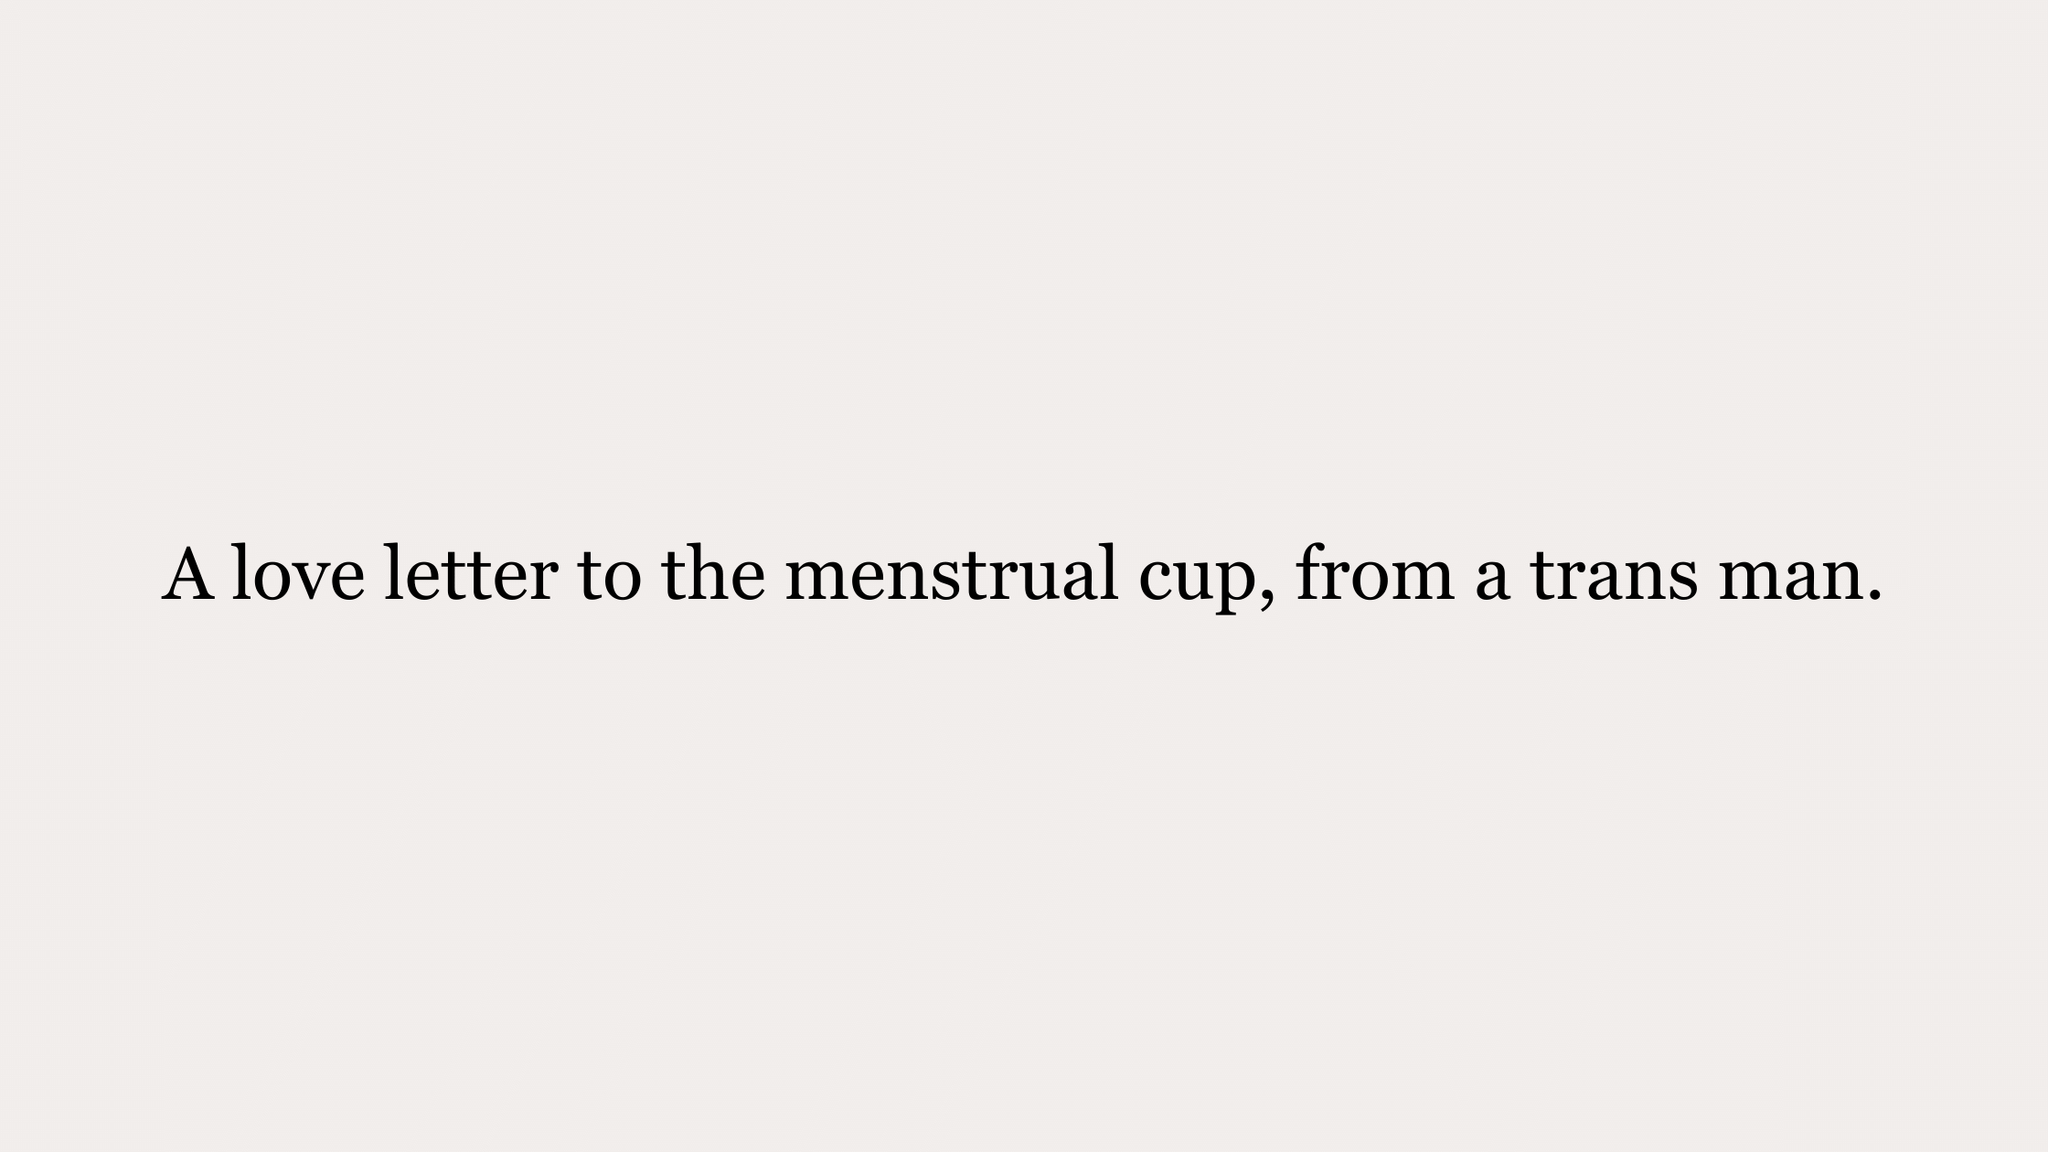 A love letter to the menstrual cup, from a trans man